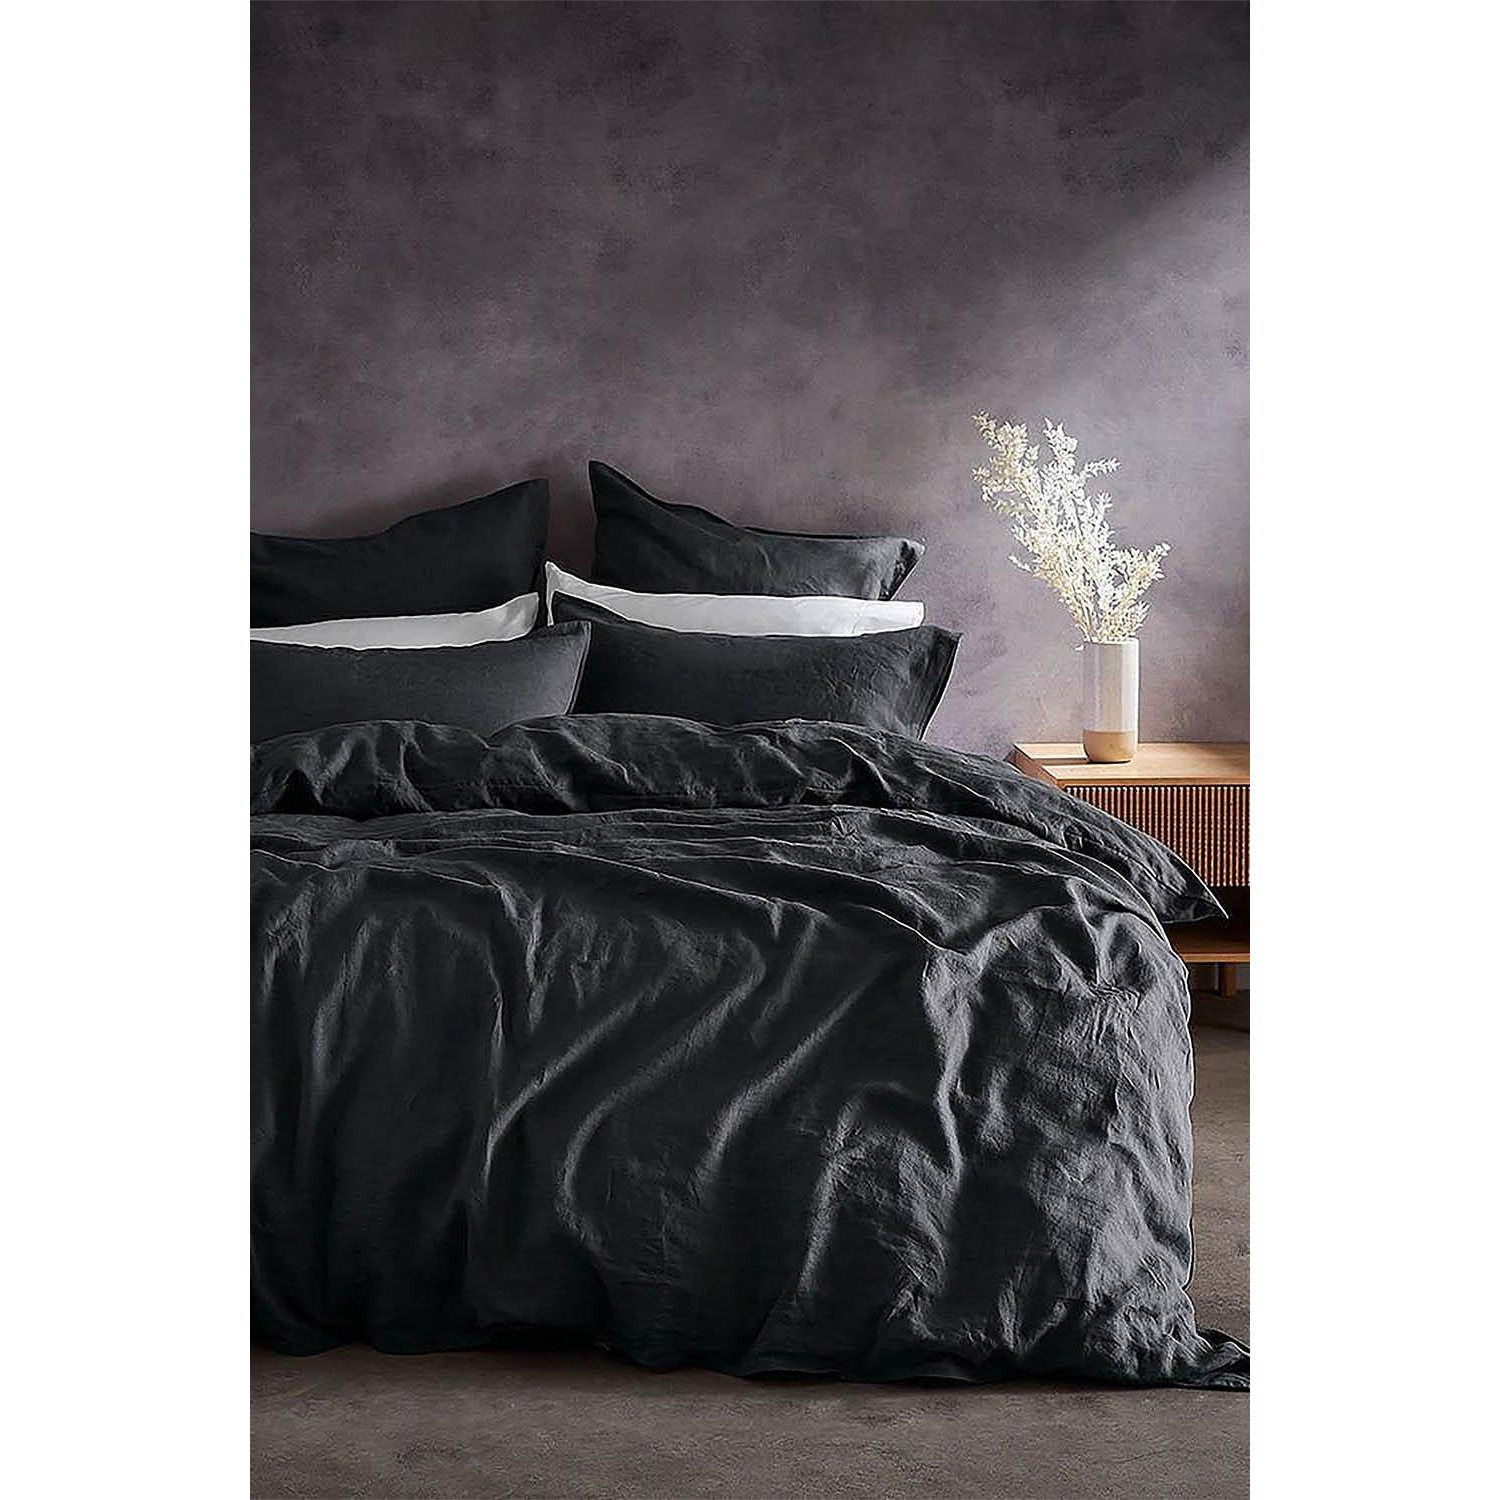 'Pure Washed Linen' Duvet Cover - image 1